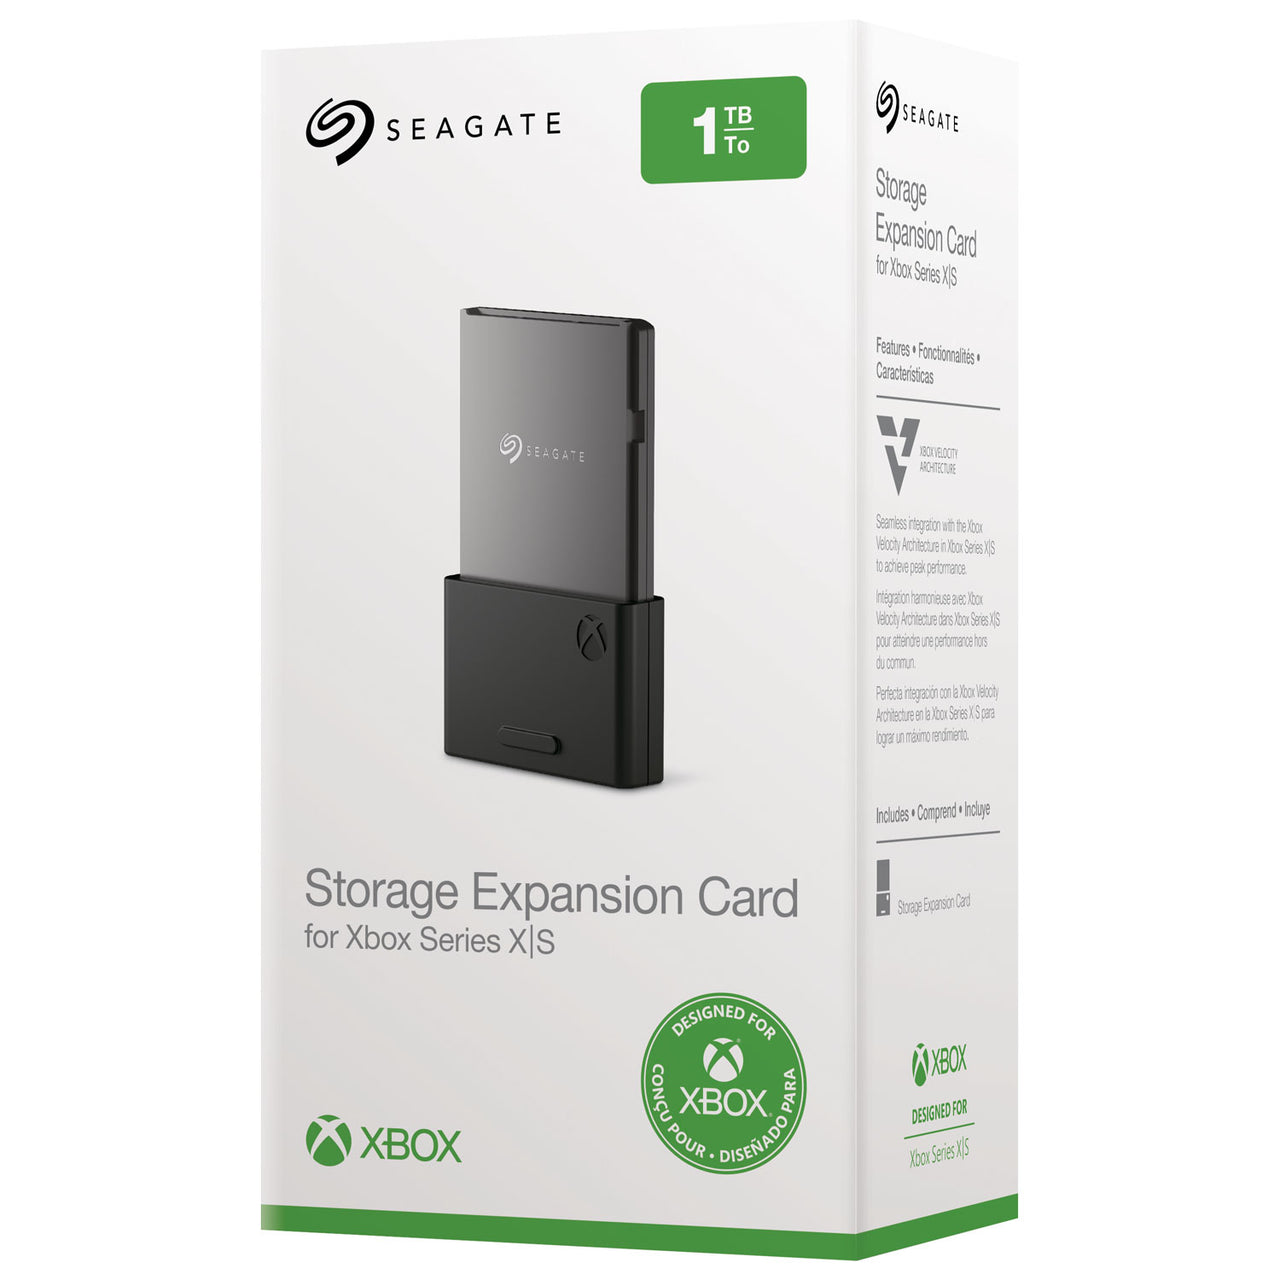 Seagate 1TB Storage Expansion Card for Xbox Series X and Series S